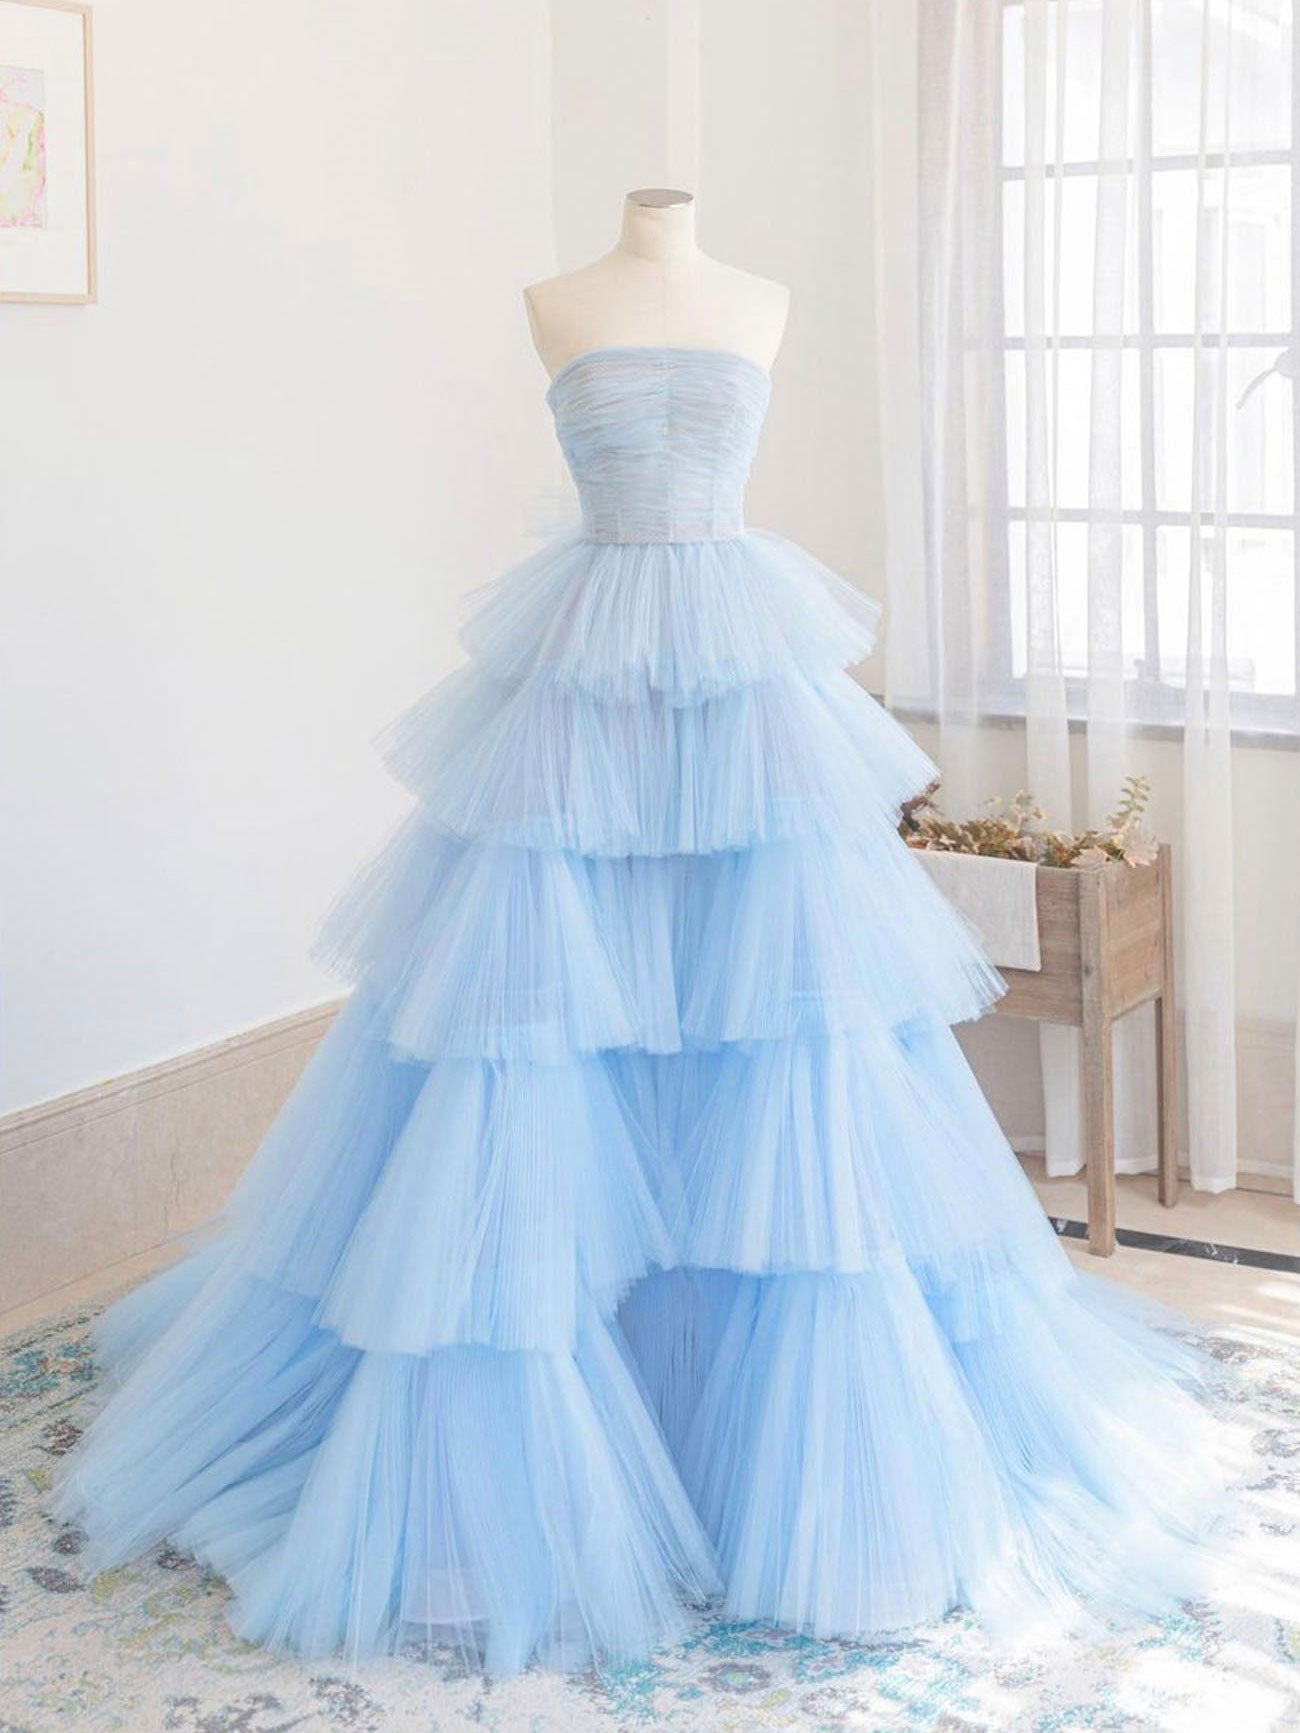 Party Dresses Cocktail, Blue Tulle Long Prom Dress, Blue Tulle Ball Gown Evening Dresses